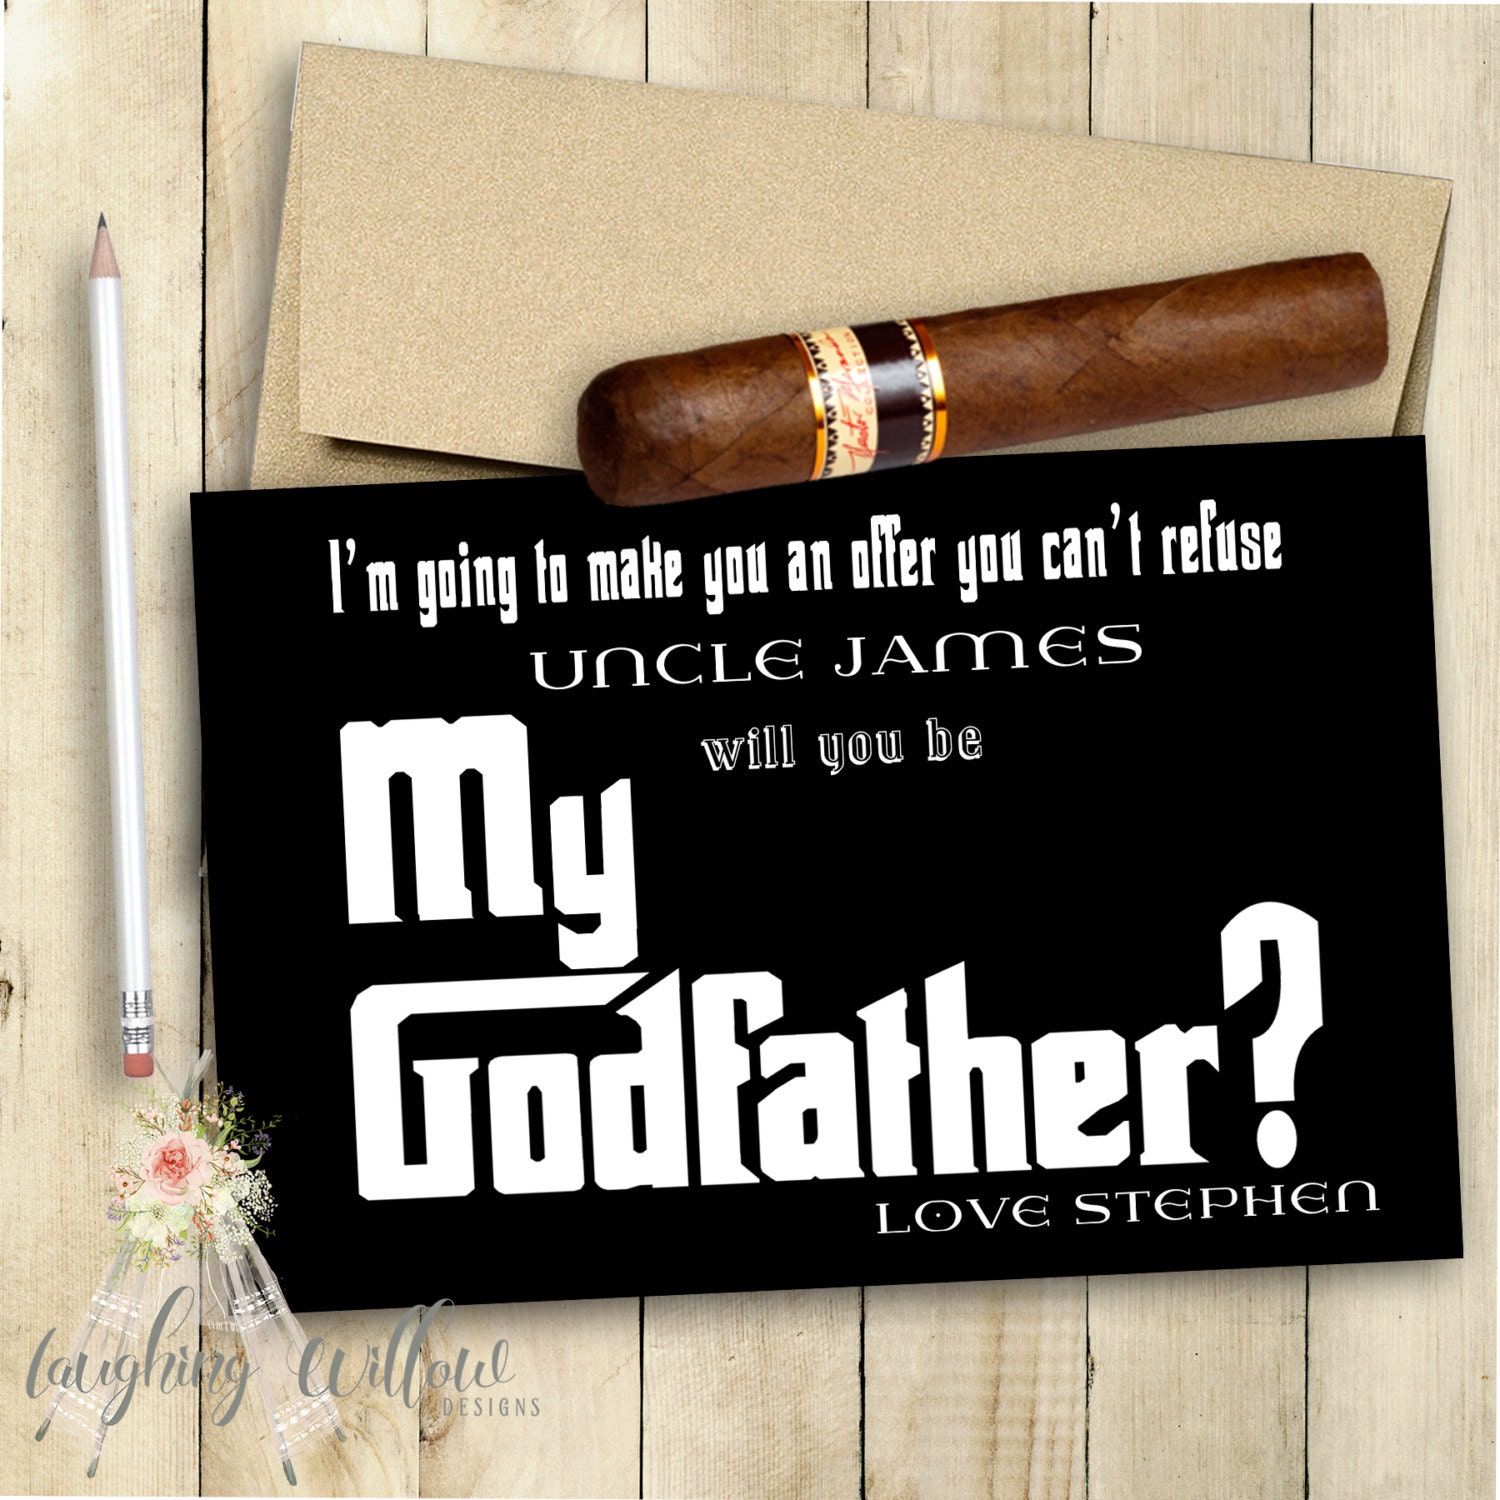 the godfather pc can